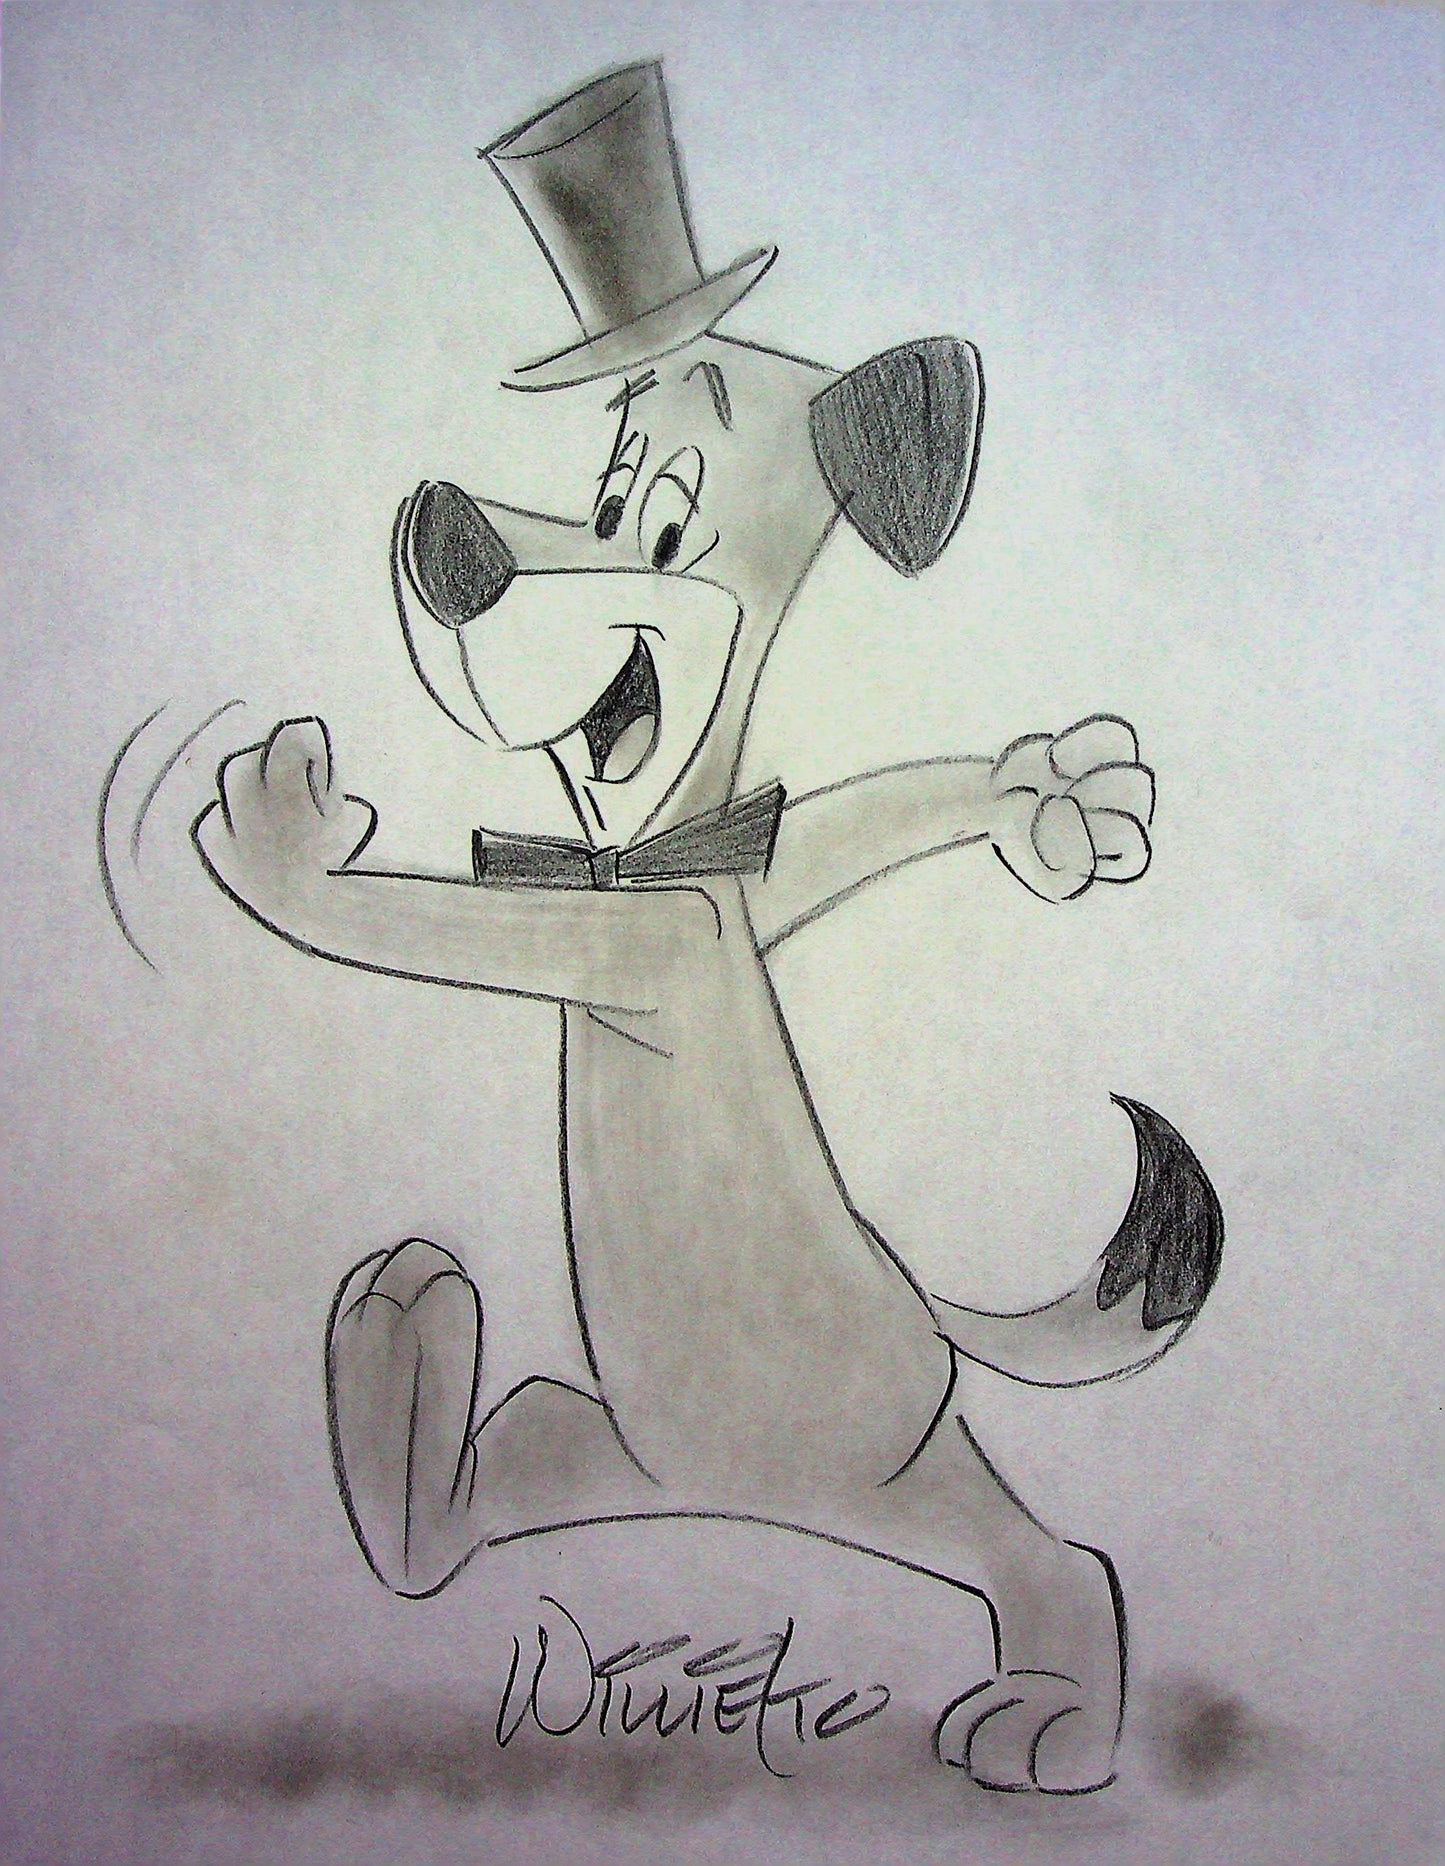 HUCKLEBERRY HOUND Willie Ito Signed Hand Drawn Pencil Animation Art 8"x11"